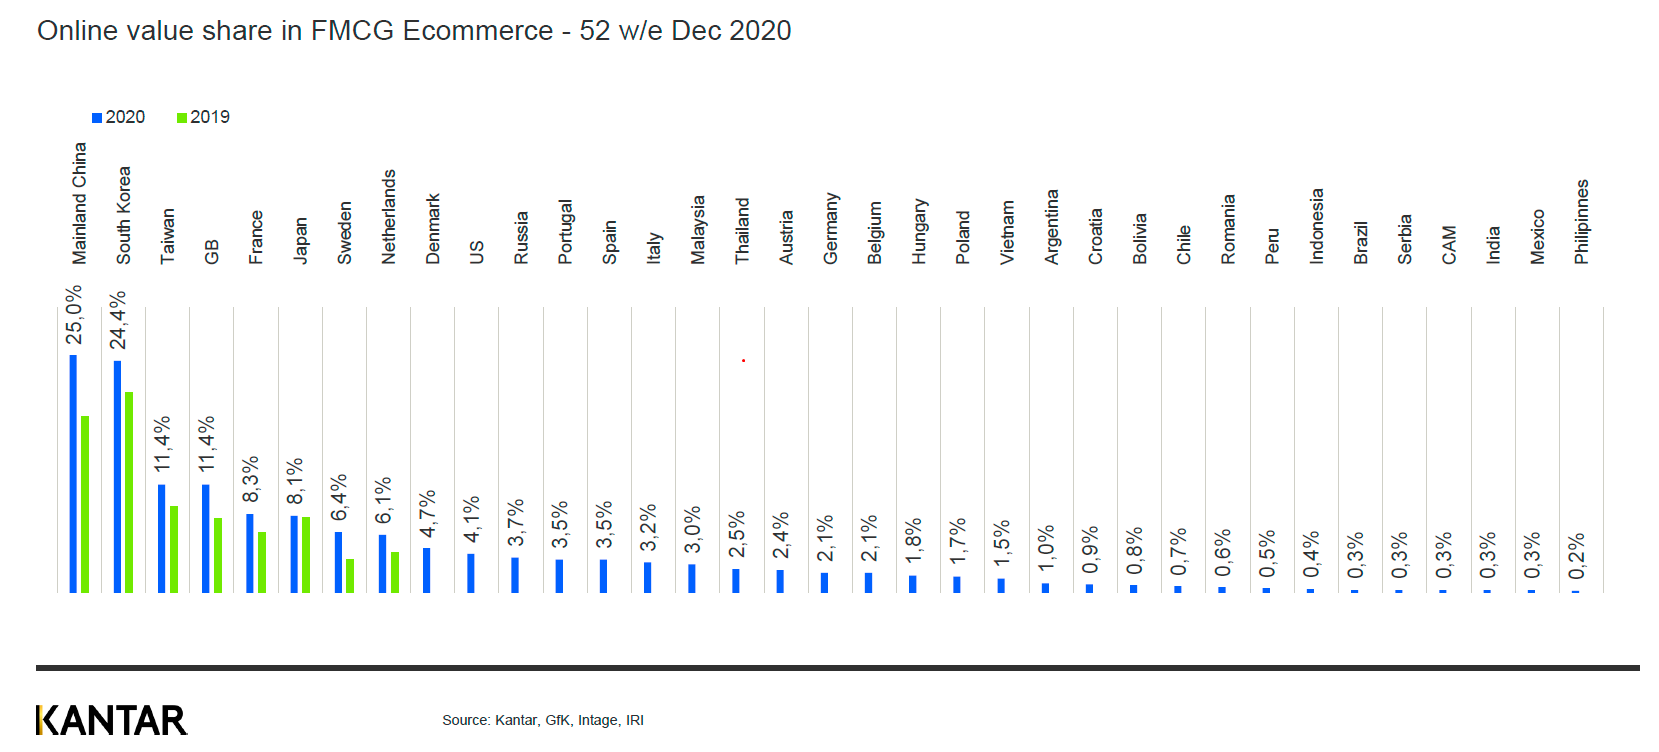 Ecommerce channel as a share of total FMCG sales